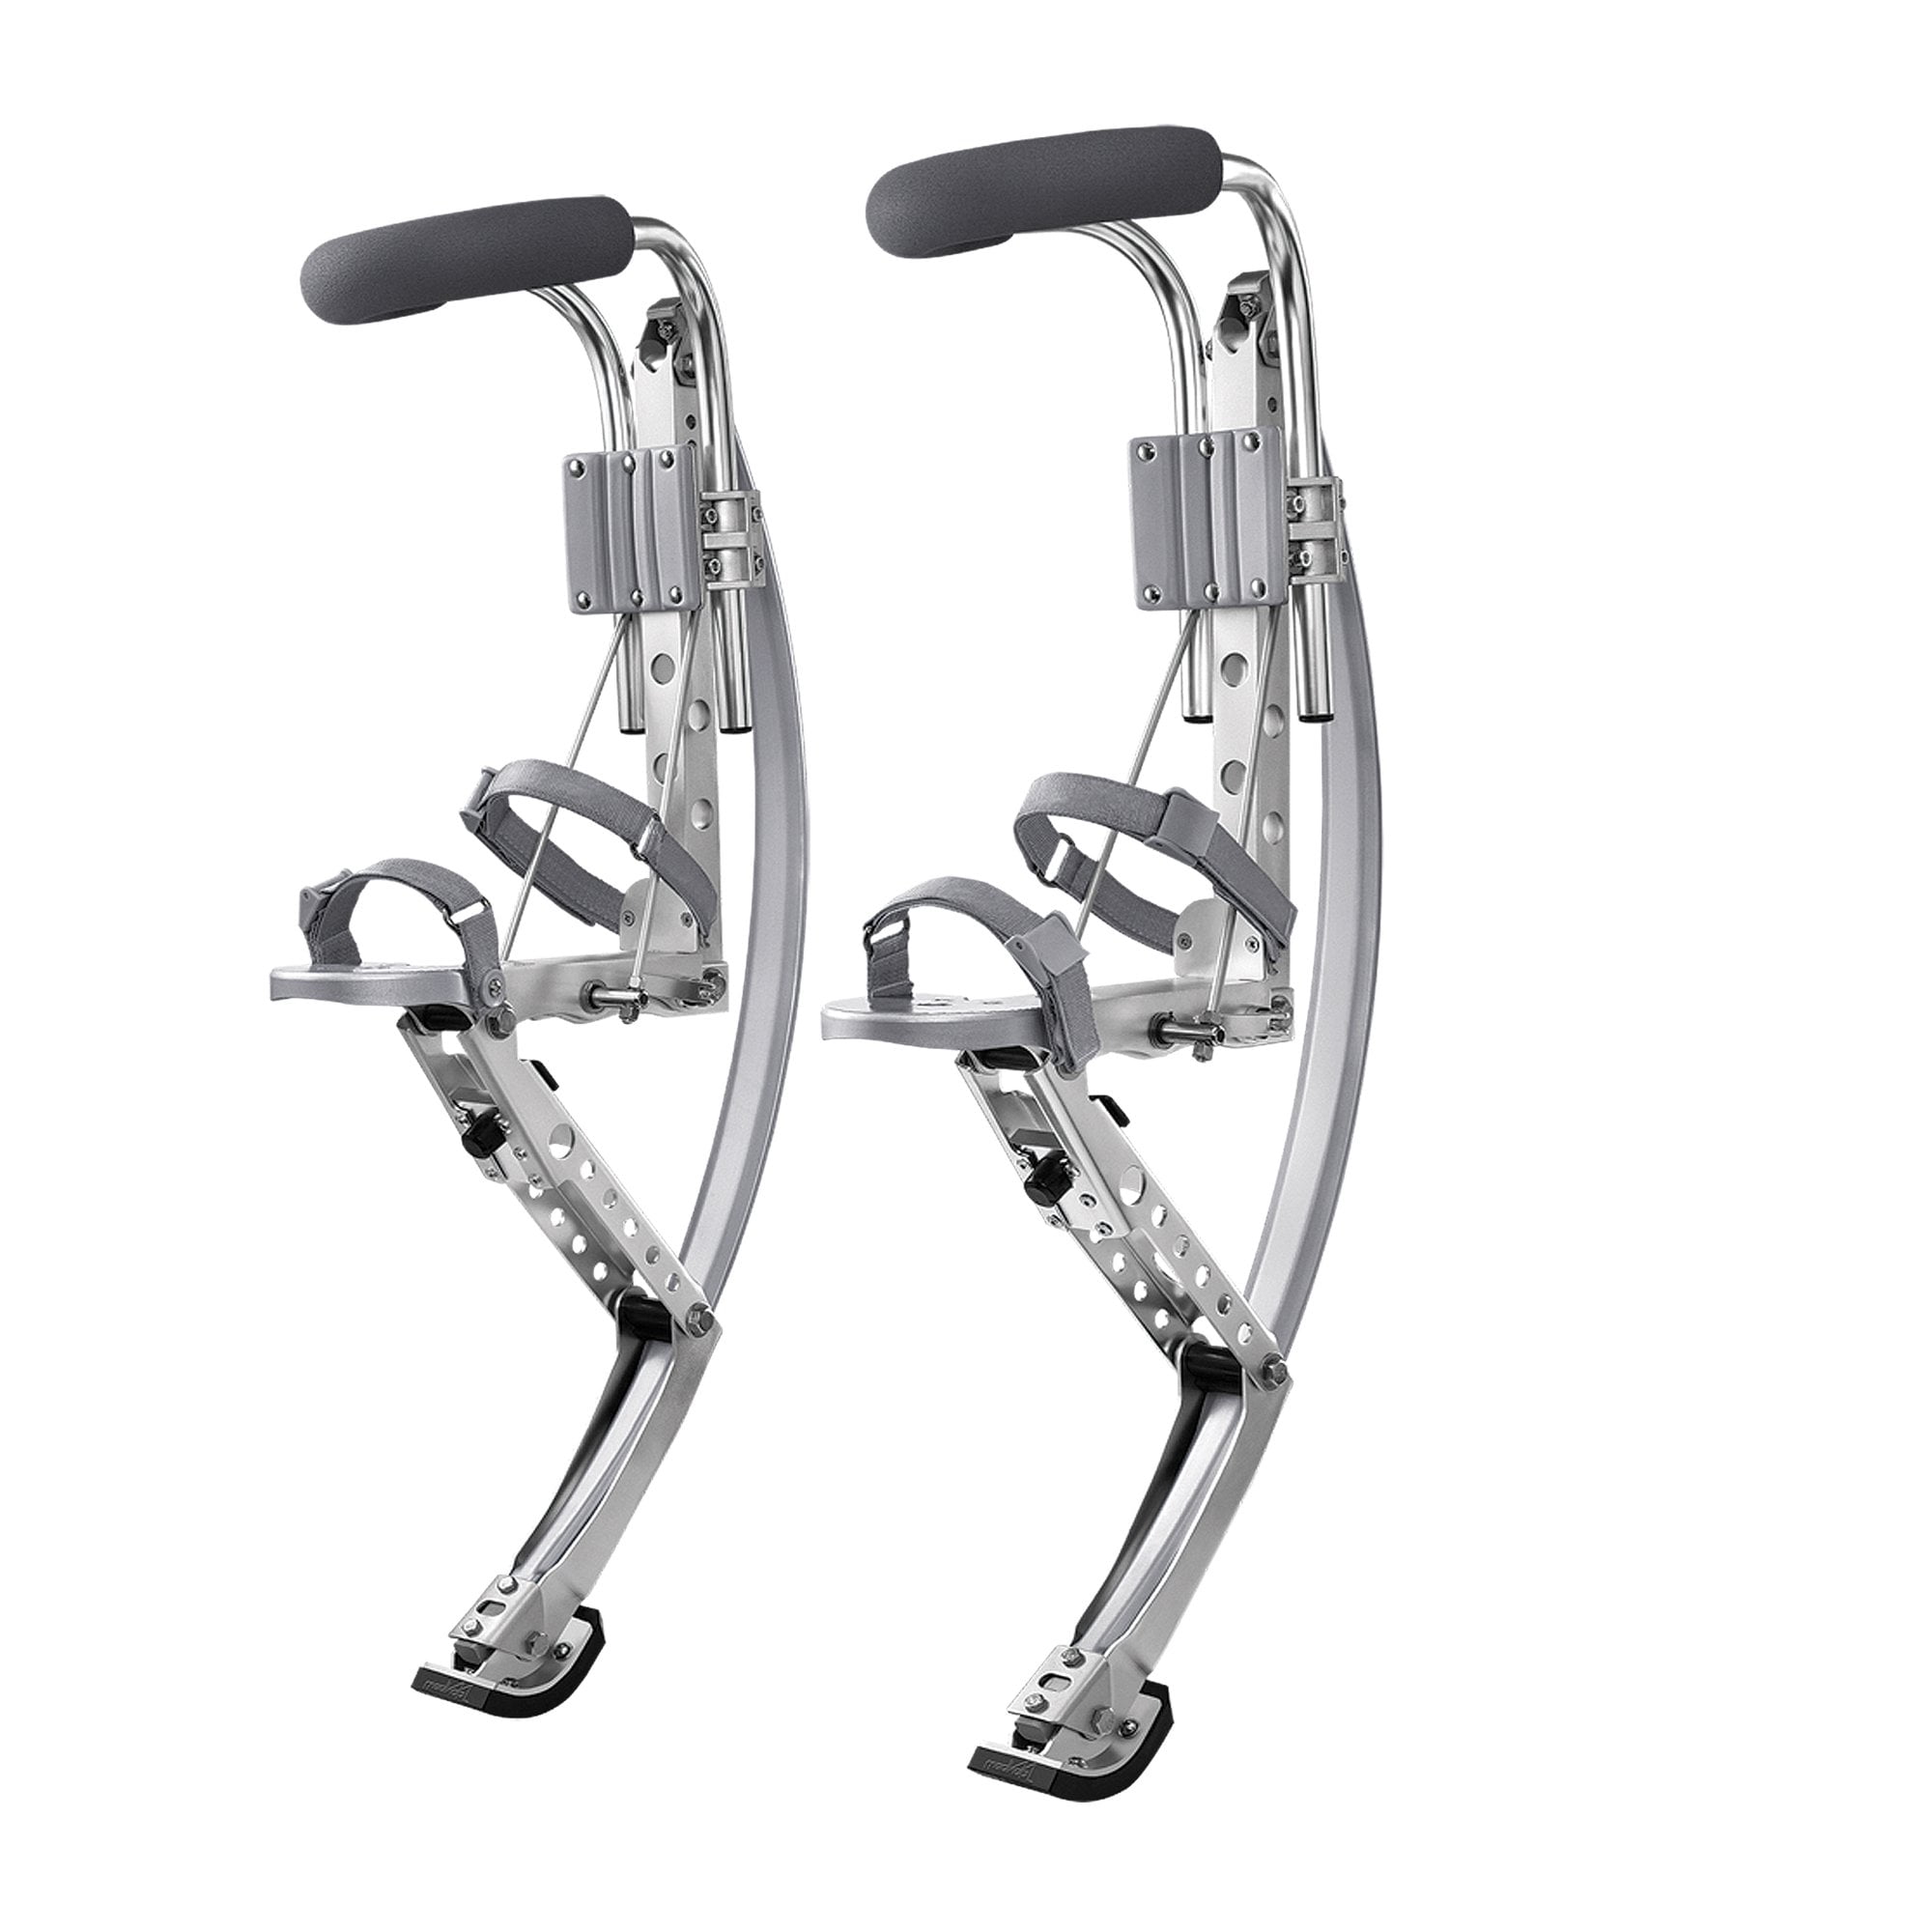 Jumping stilts for adult men women with body weight 200-242LBS or 90-110KG USE 